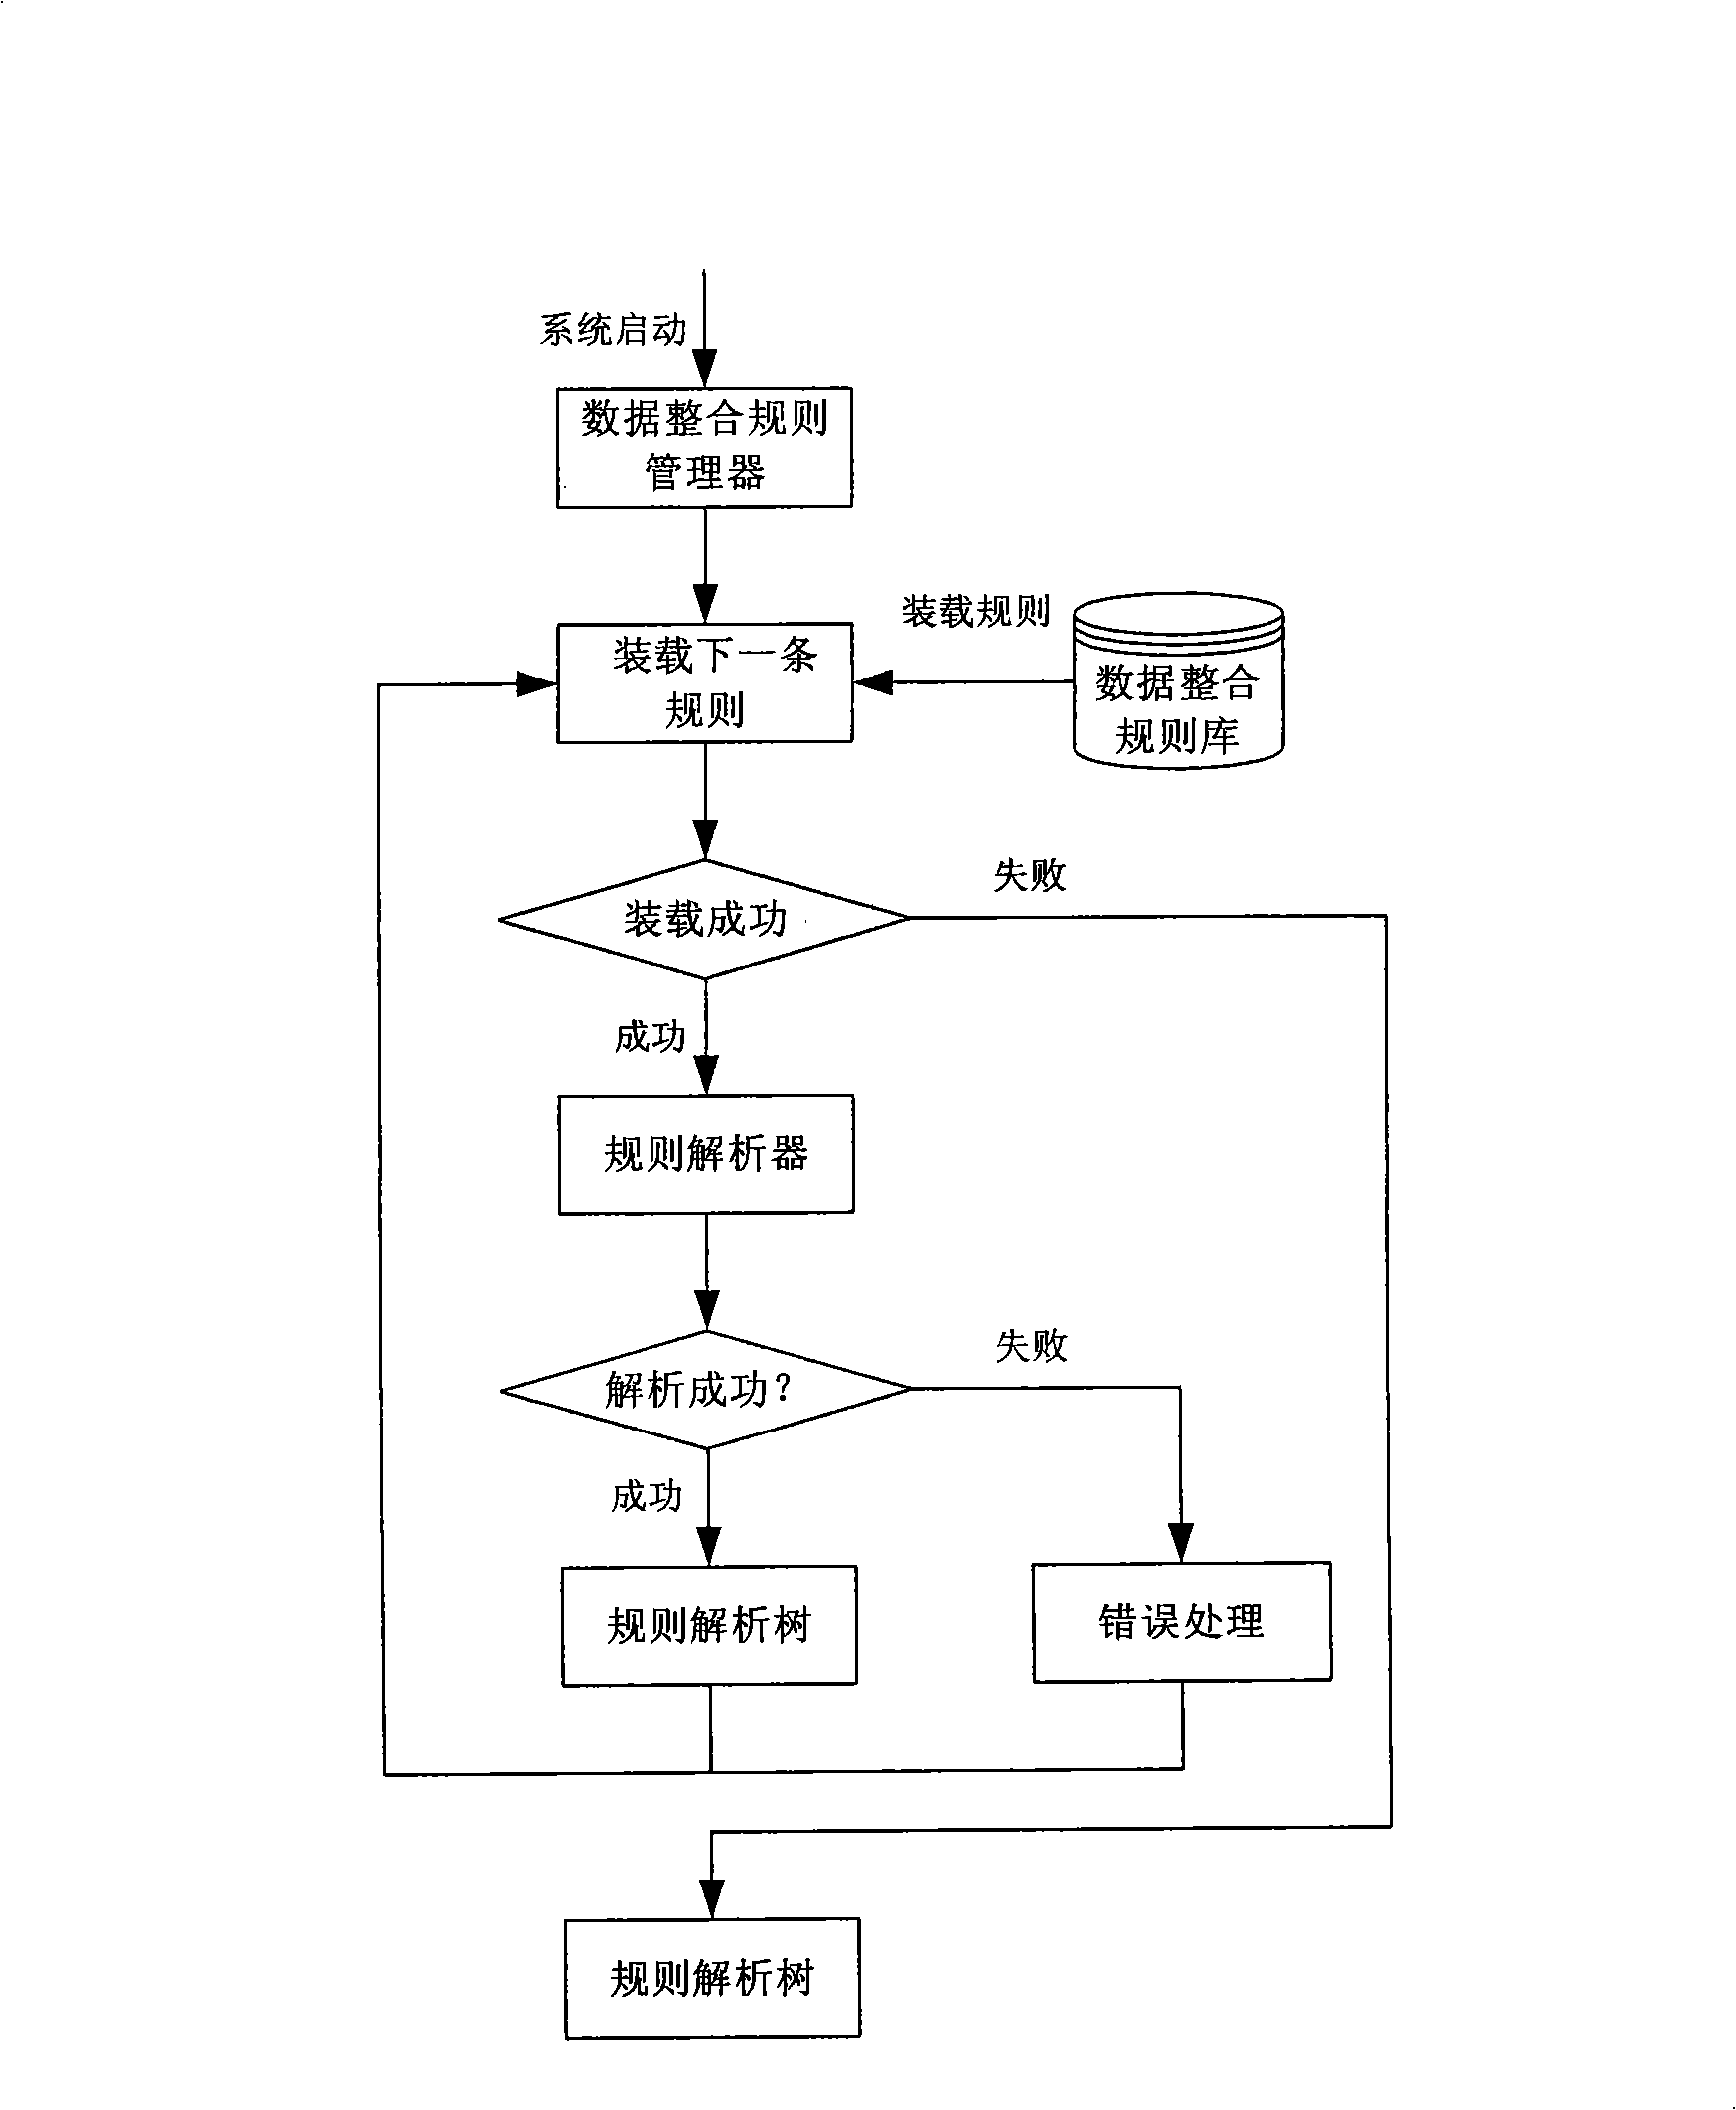 System and method for integrating real-time data and relationship data